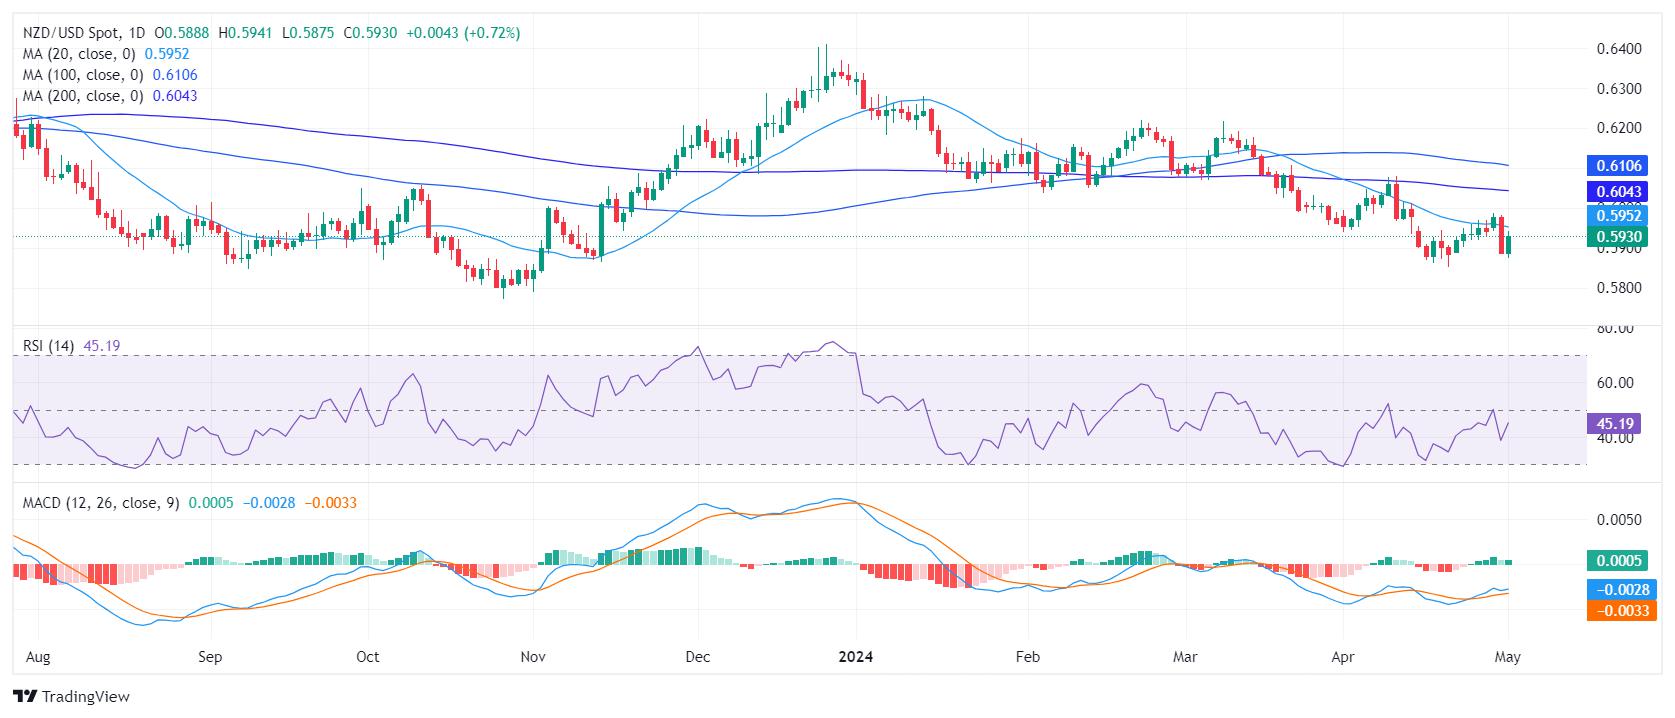 NZD/USD holds gains following Fed’s decision